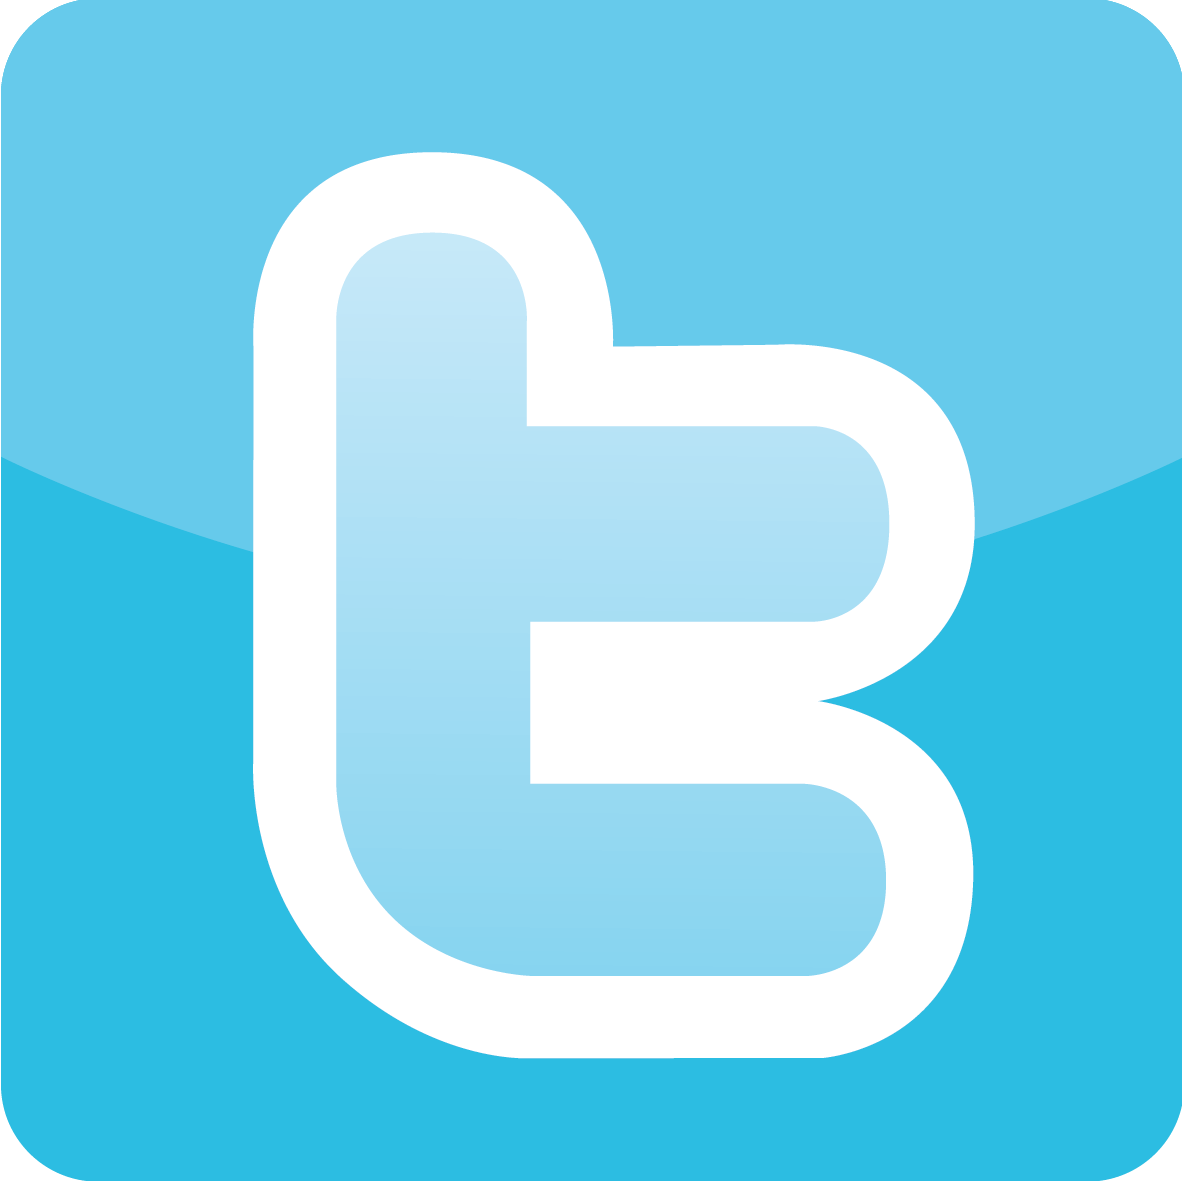 Official Twitter Logo - Twitter logo PNG image free download